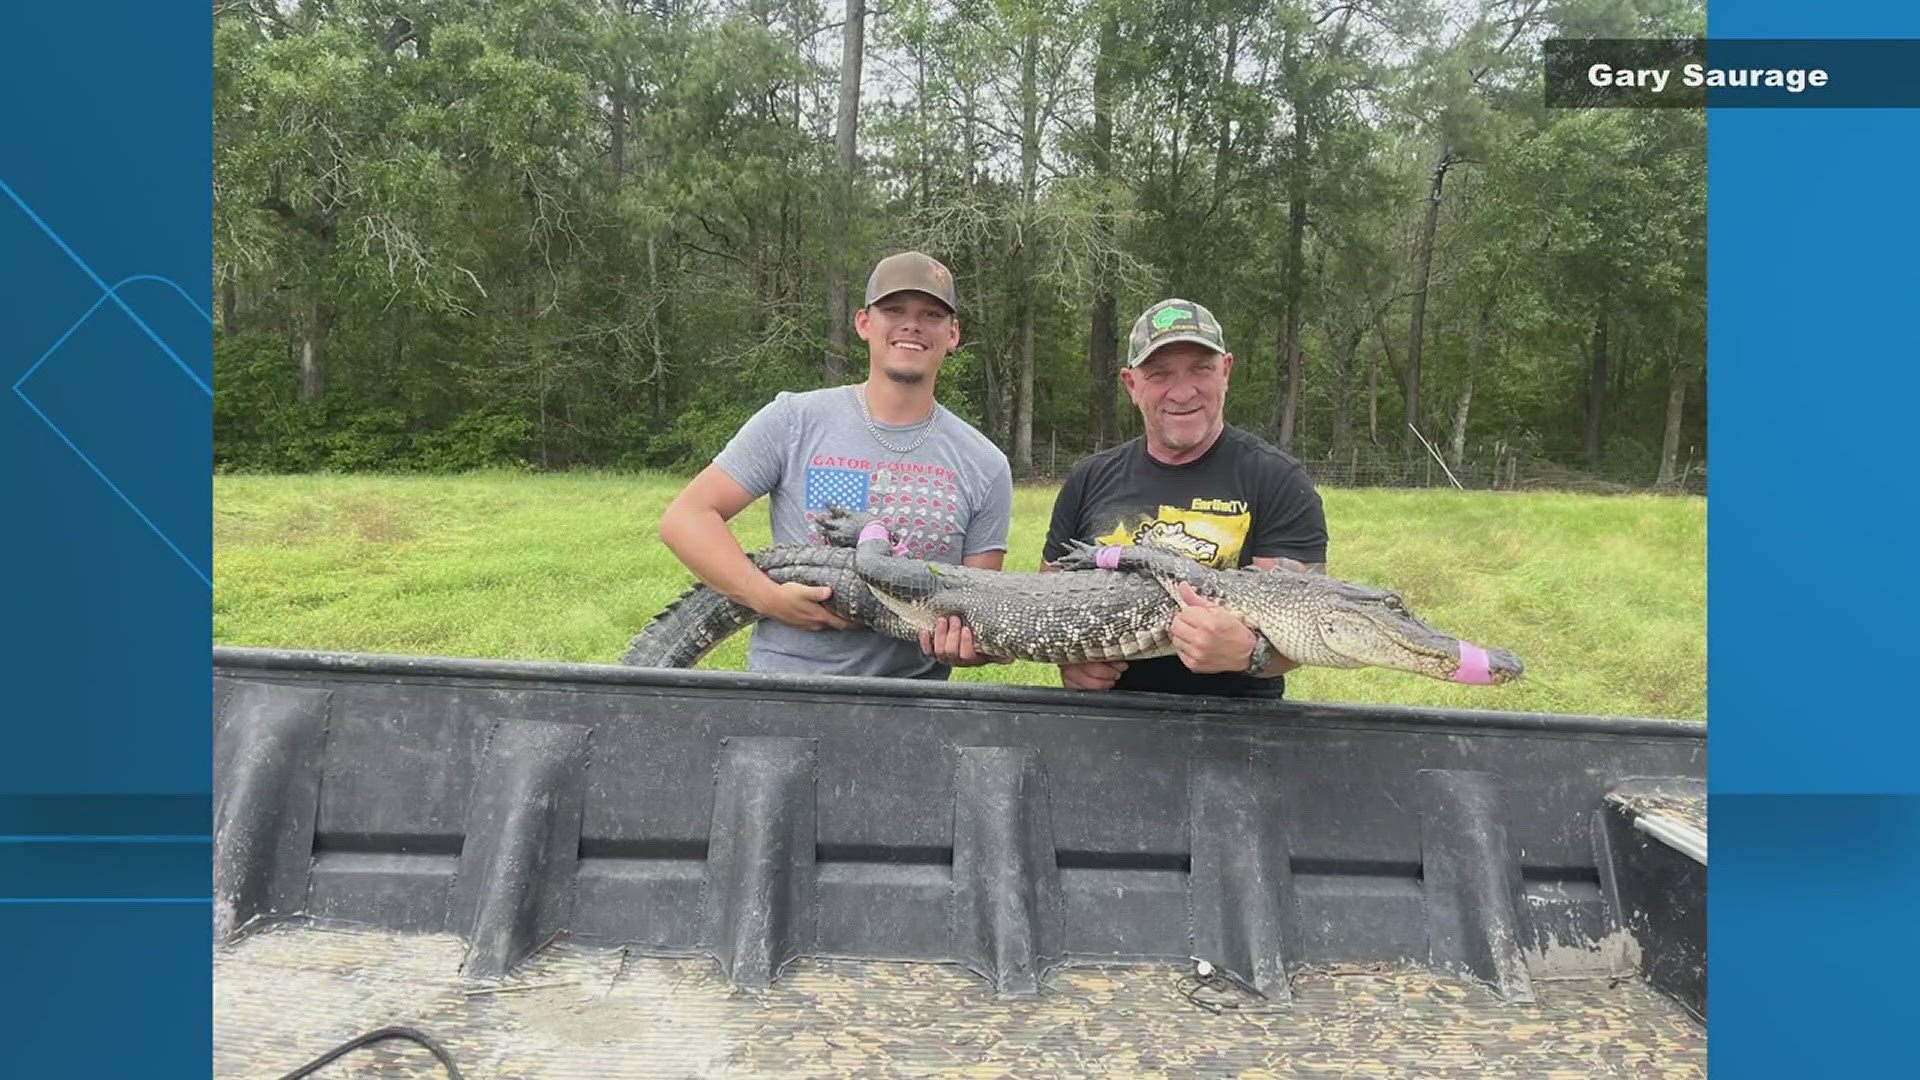 Gary Saurage says the gator was living miles away from its original home, nowhere near it's natural habitat, taking up residence in the catfish pond.